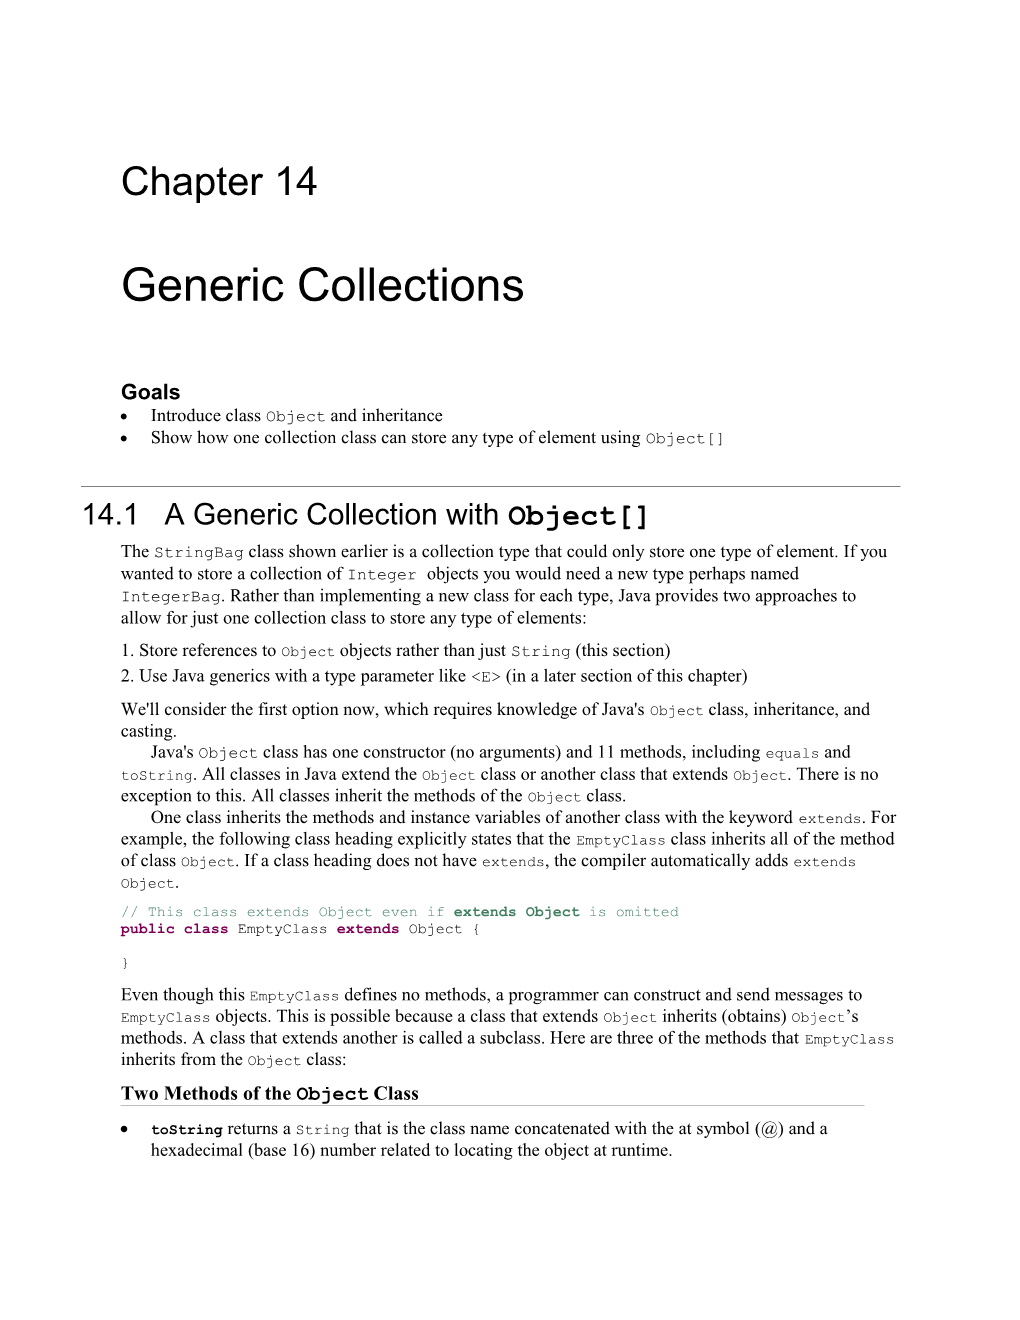 Chapter 14 Generic Collections